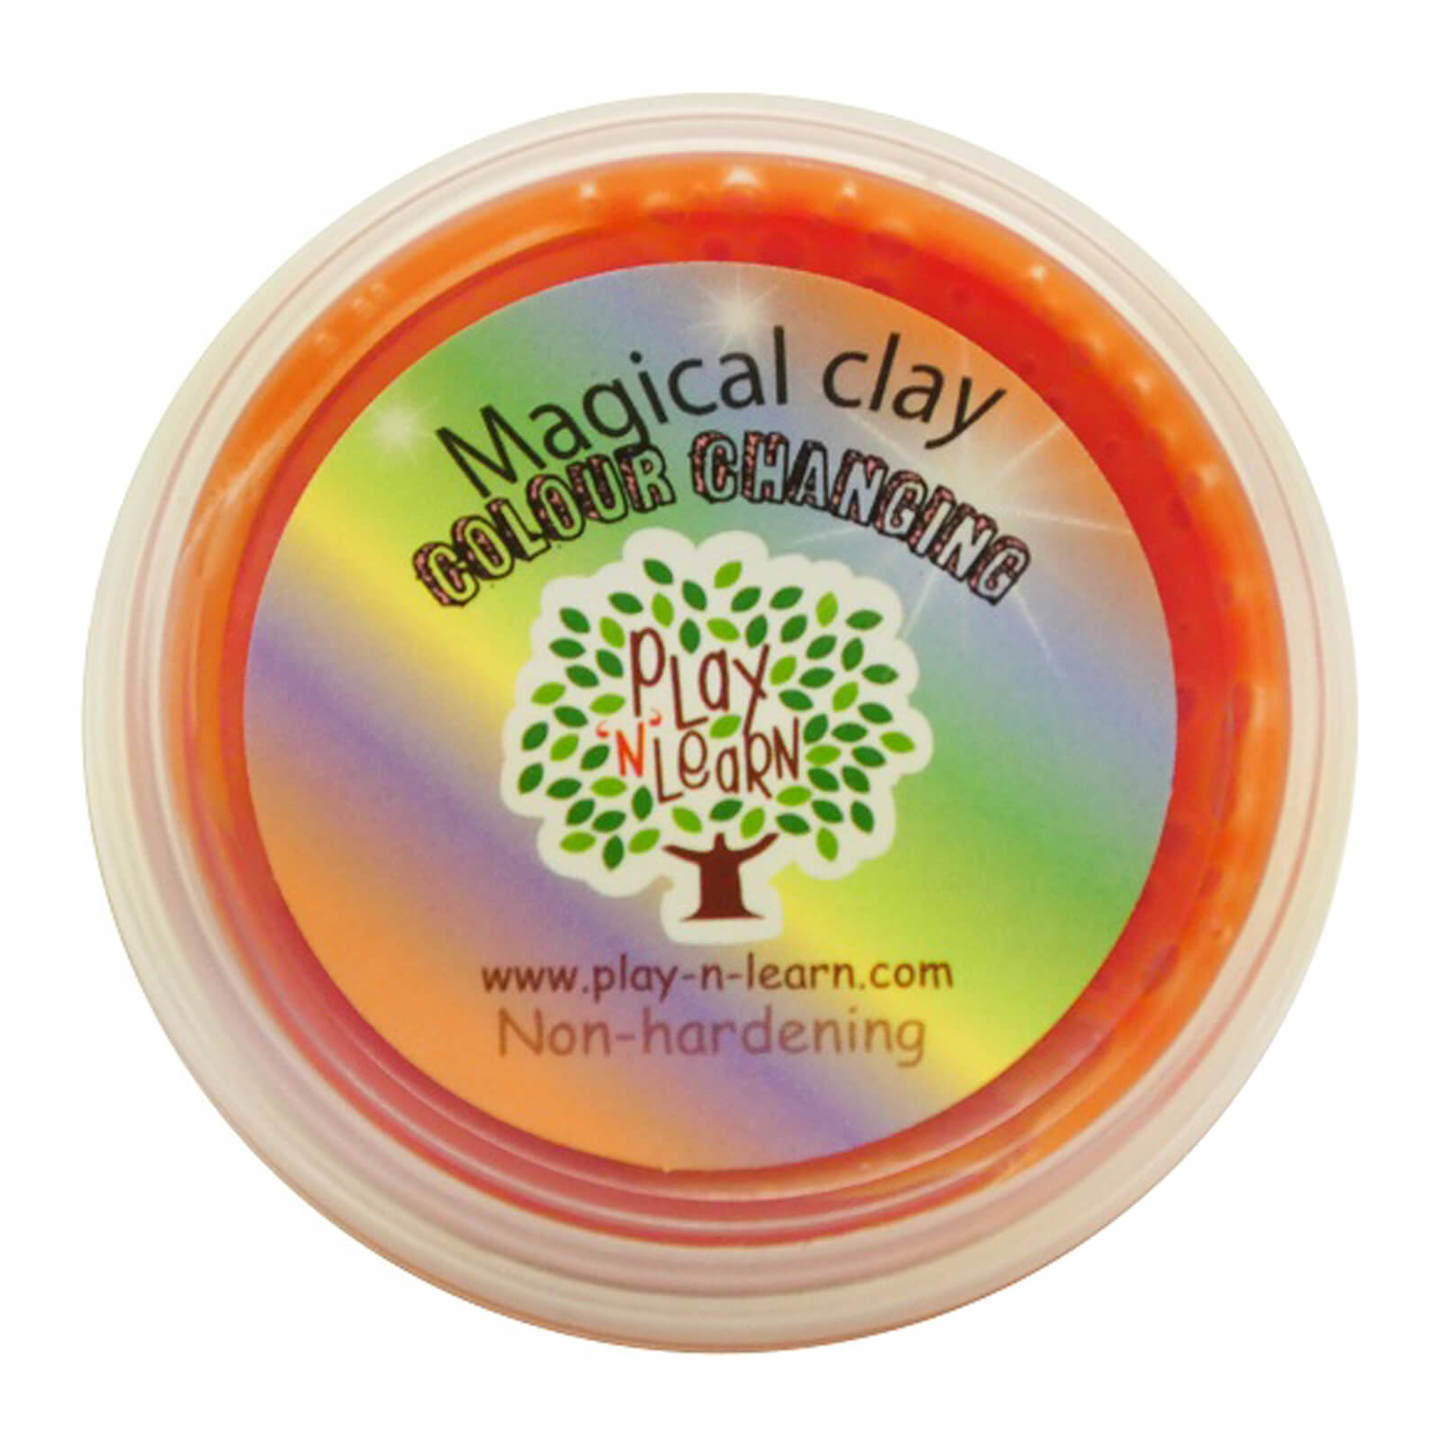 Putty Imaginative Play N Learn Party Gift Magical Clay Colour Changing Orange